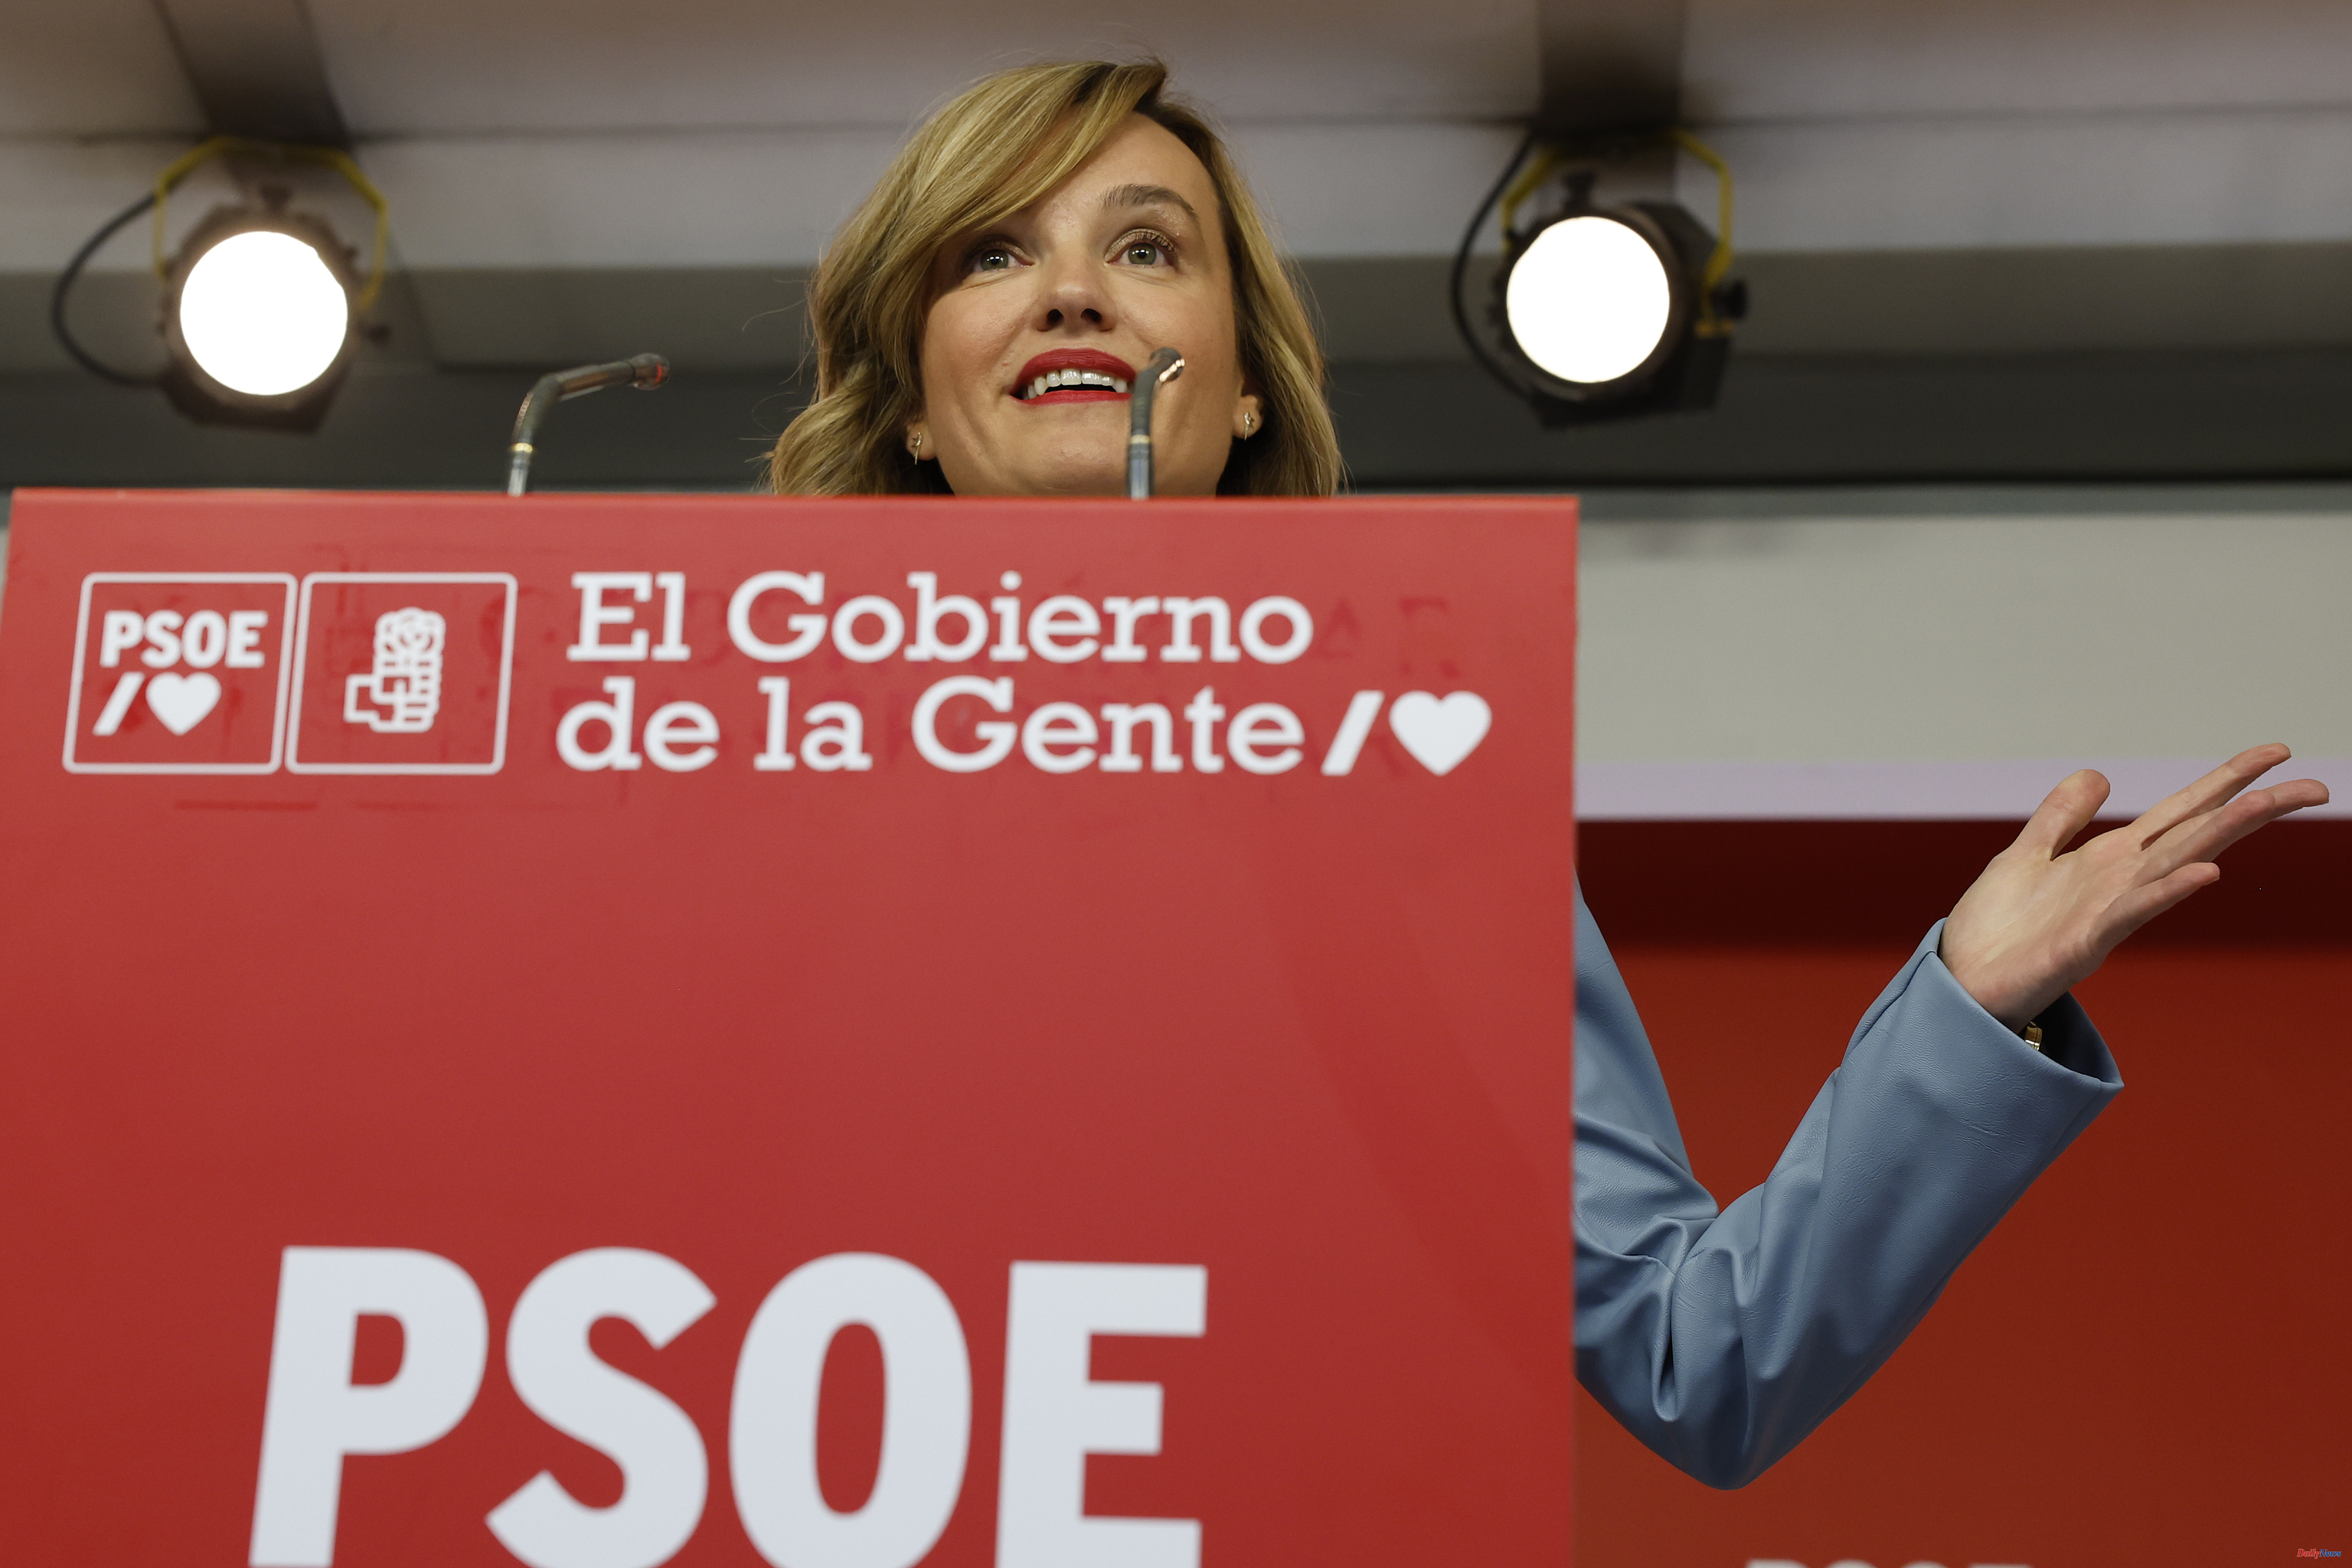 Politics The PSOE uses Casado to try to wear down Feijóo with Vox's motion of no confidence